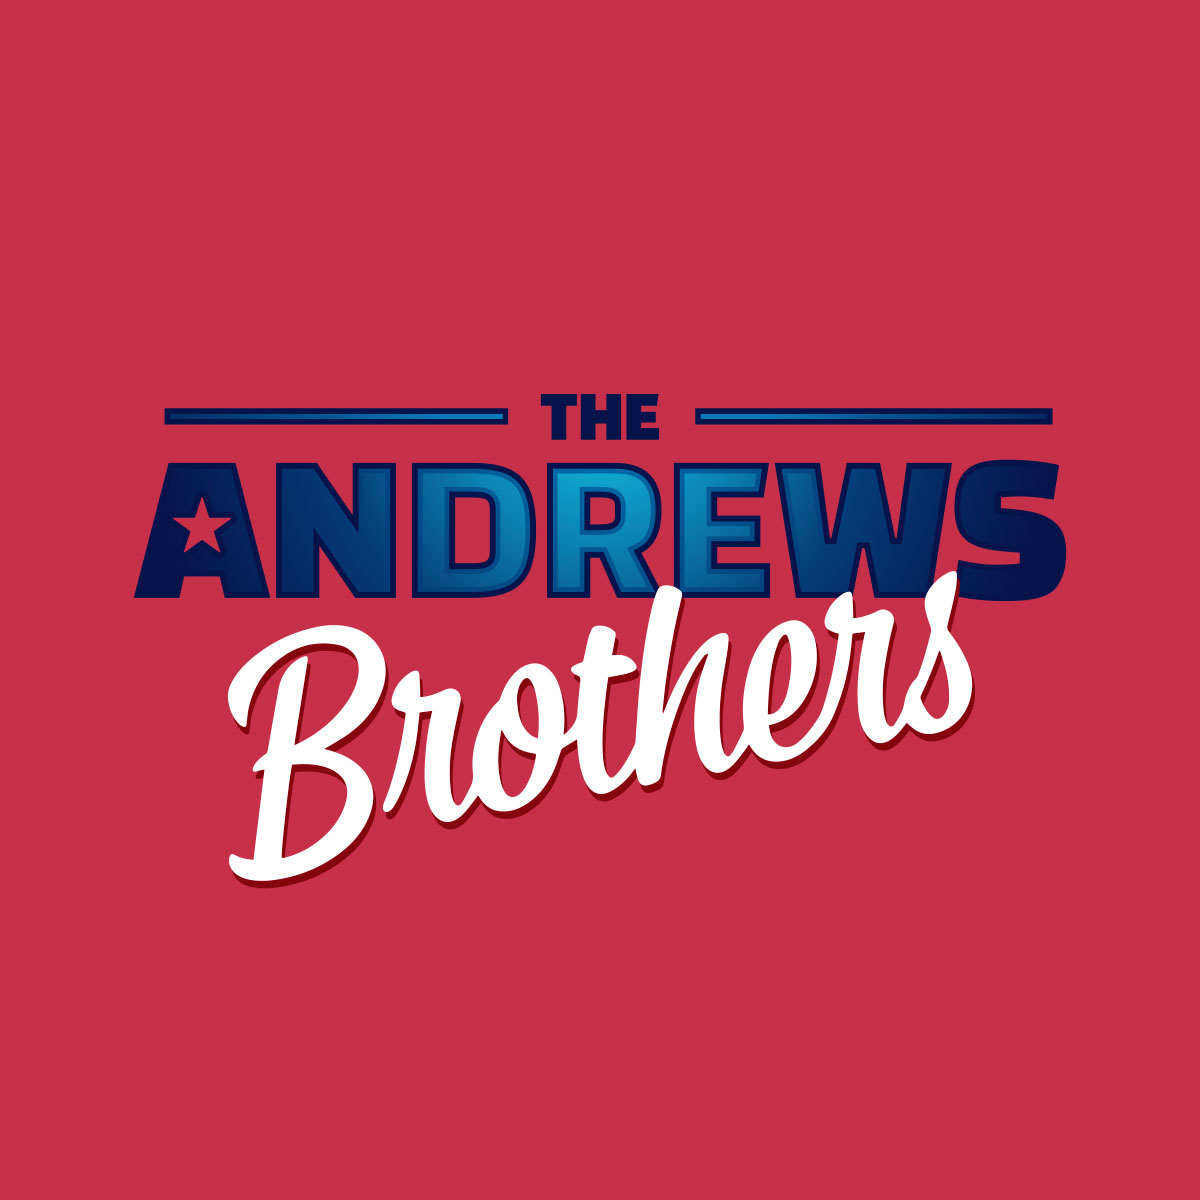 The Andrews Brothers Logo Pack